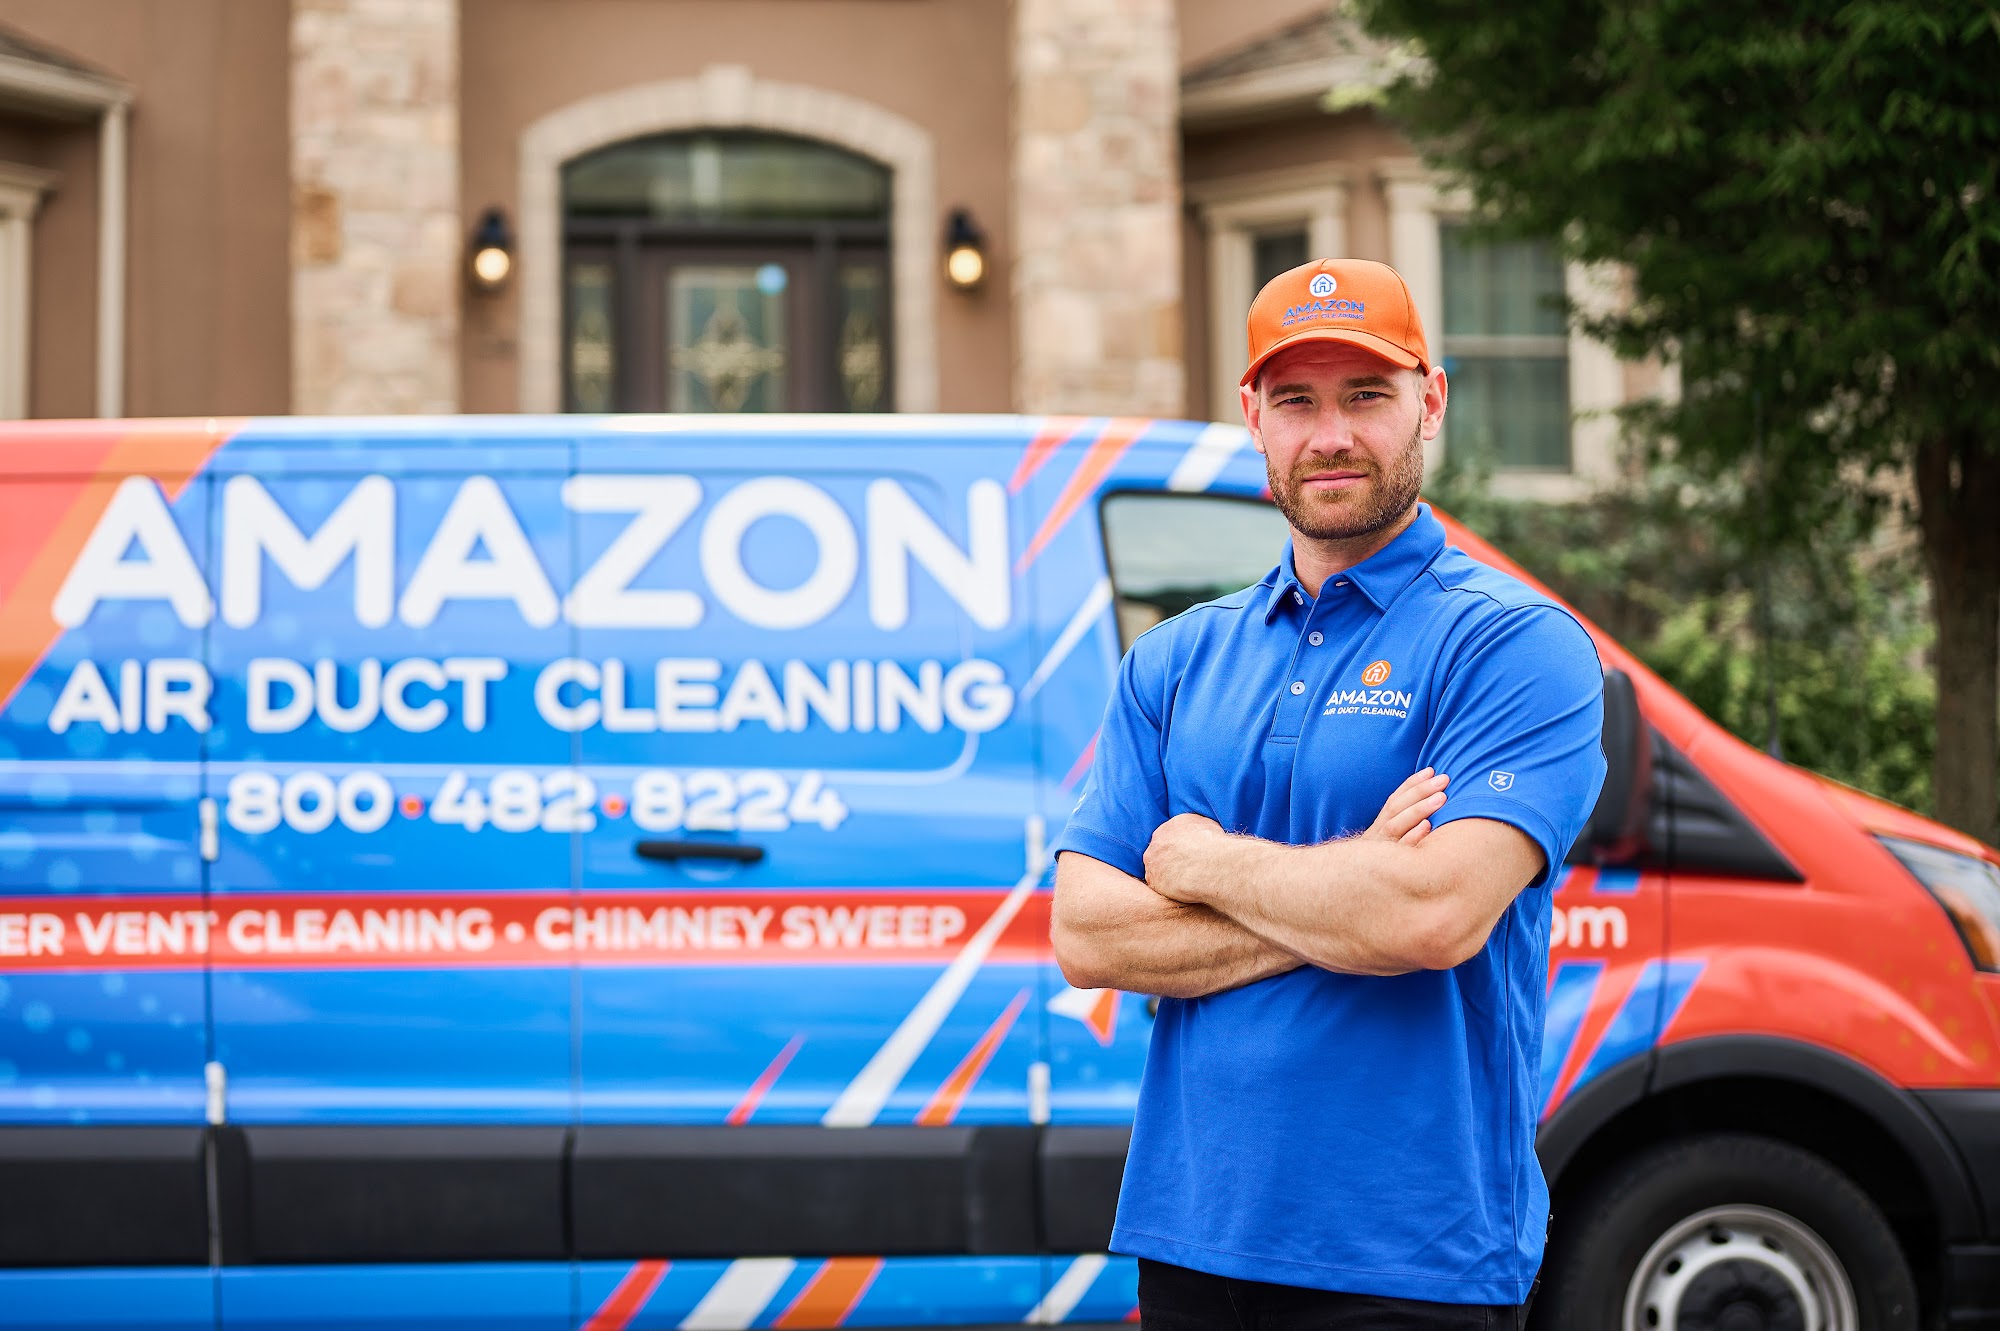 Amazon Air Duct & Dryer Vent Cleaning Parsippany-Troy Hills